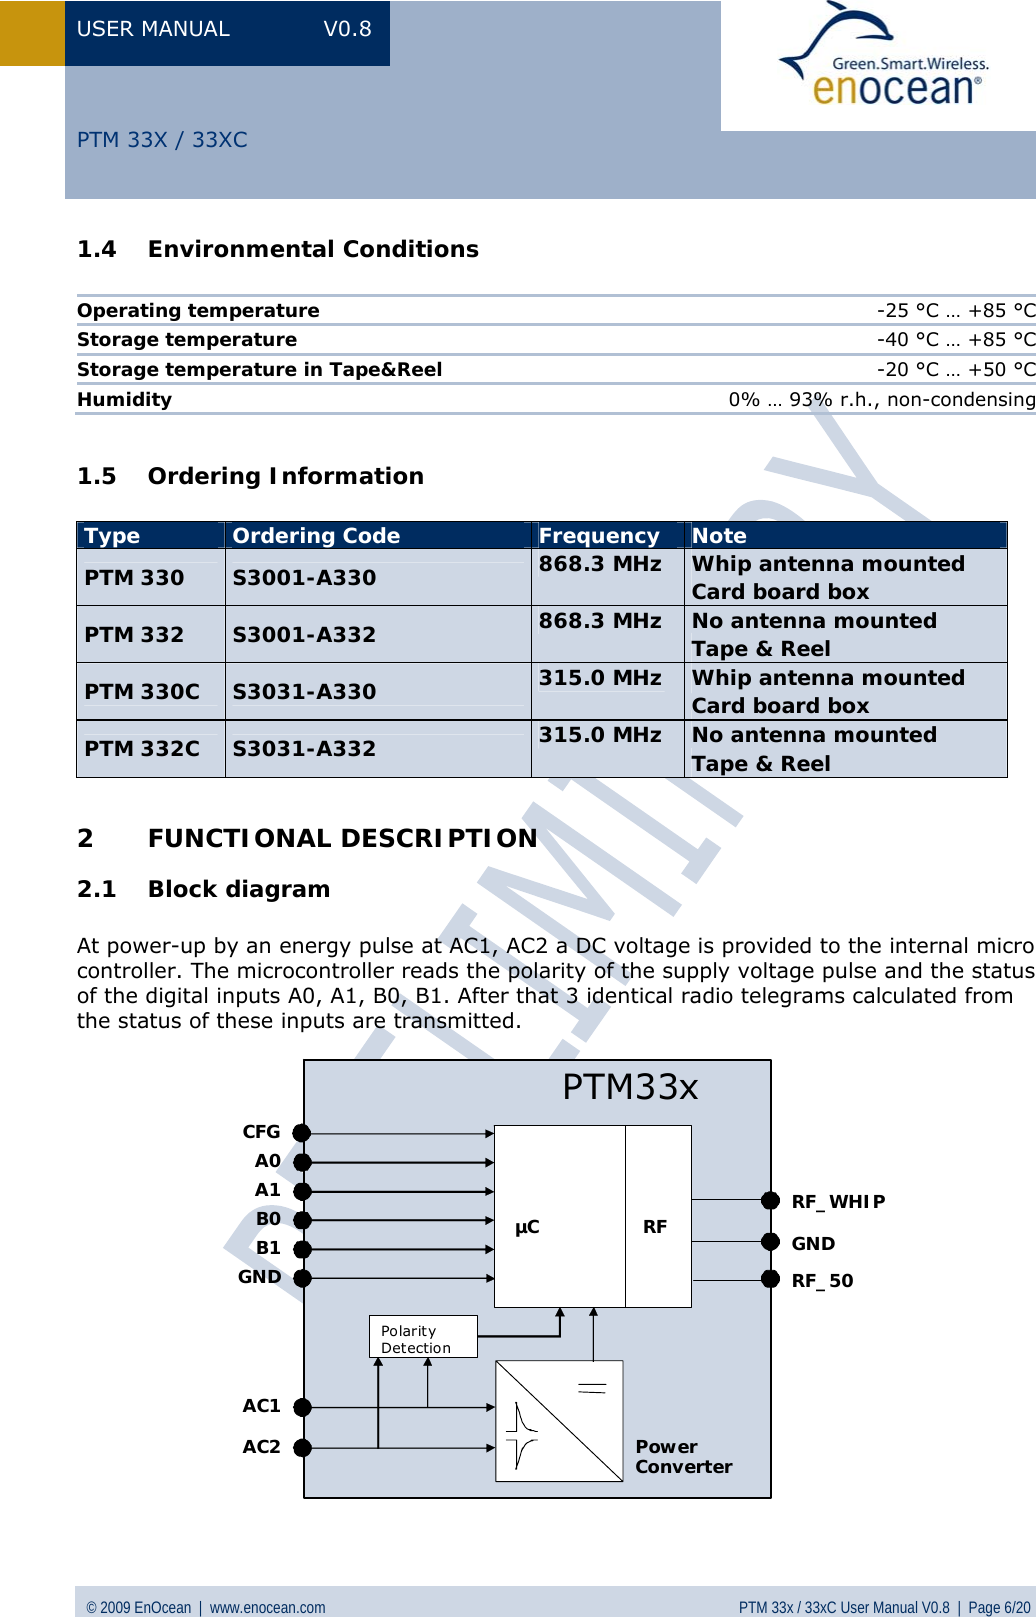 USER MANUAL V0.8 © 2009 EnOcean  |  www.enocean.com  PTM 33x / 33xC User Manual V0.8  |  Page 6/20   PTM 33X / 33XC 1.4 Environmental Conditions  Operating temperature  -25 °C … +85 °C Storage temperature  -40 °C … +85 °C Storage temperature in Tape&amp;Reel  -20 °C … +50 °C Humidity  0% … 93% r.h., non-condensing  1.5 Ordering Information  Type  Ordering Code  Frequency  Note PTM 330  S3001-A330  868.3 MHz  Whip antenna mounted Card board box PTM 332  S3001-A332  868.3 MHz  No antenna mounted Tape &amp; Reel PTM 330C  S3031-A330  315.0 MHz  Whip antenna mounted Card board box PTM 332C  S3031-A332  315.0 MHz  No antenna mounted Tape &amp; Reel  2 FUNCTIONAL DESCRIPTION 2.1 Block diagram  At power-up by an energy pulse at AC1, AC2 a DC voltage is provided to the internal micro controller. The microcontroller reads the polarity of the supply voltage pulse and the status of the digital inputs A0, A1, B0, B1. After that 3 identical radio telegrams calculated from the status of these inputs are transmitted. RFPowerConverterGNDAC1AC2RF_50PTM33xRF_WHIPA0A1µCB0B1PolarityDetectionGNDCFG